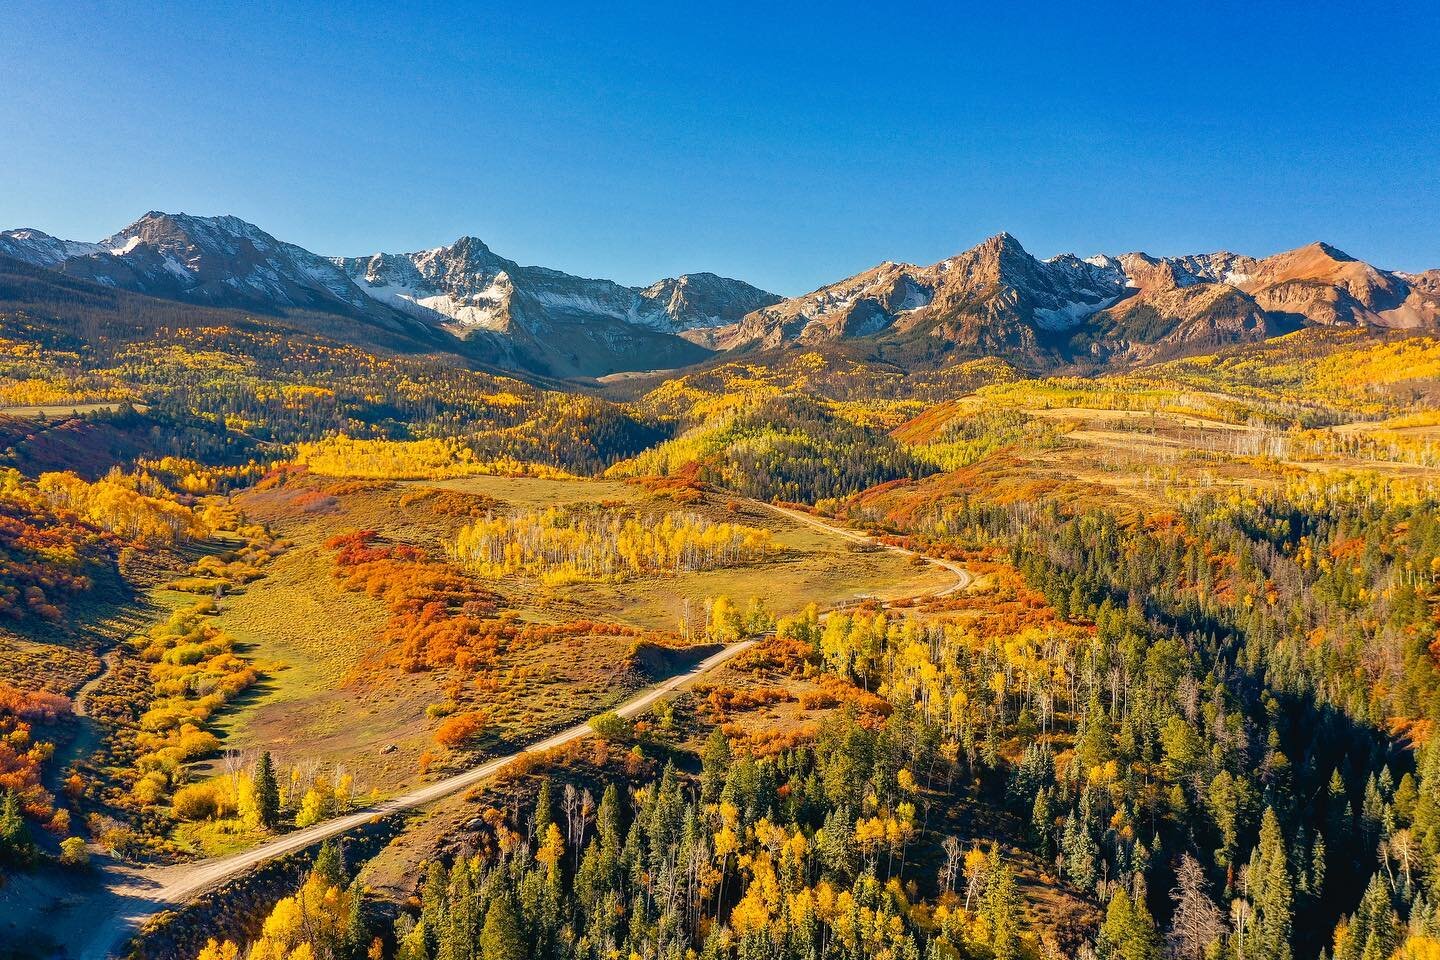 Fall in Colorado never disappoints 
-
-
-
-#leavenotrace #bestcoloradophotography #coloradotraveltips #movingtocolorado #coloradountamed #visitcolorado #coloradogram #jj_colorado #coloradoproud #docolorado #hashtagcolorado #sendit #coloradoshared #co